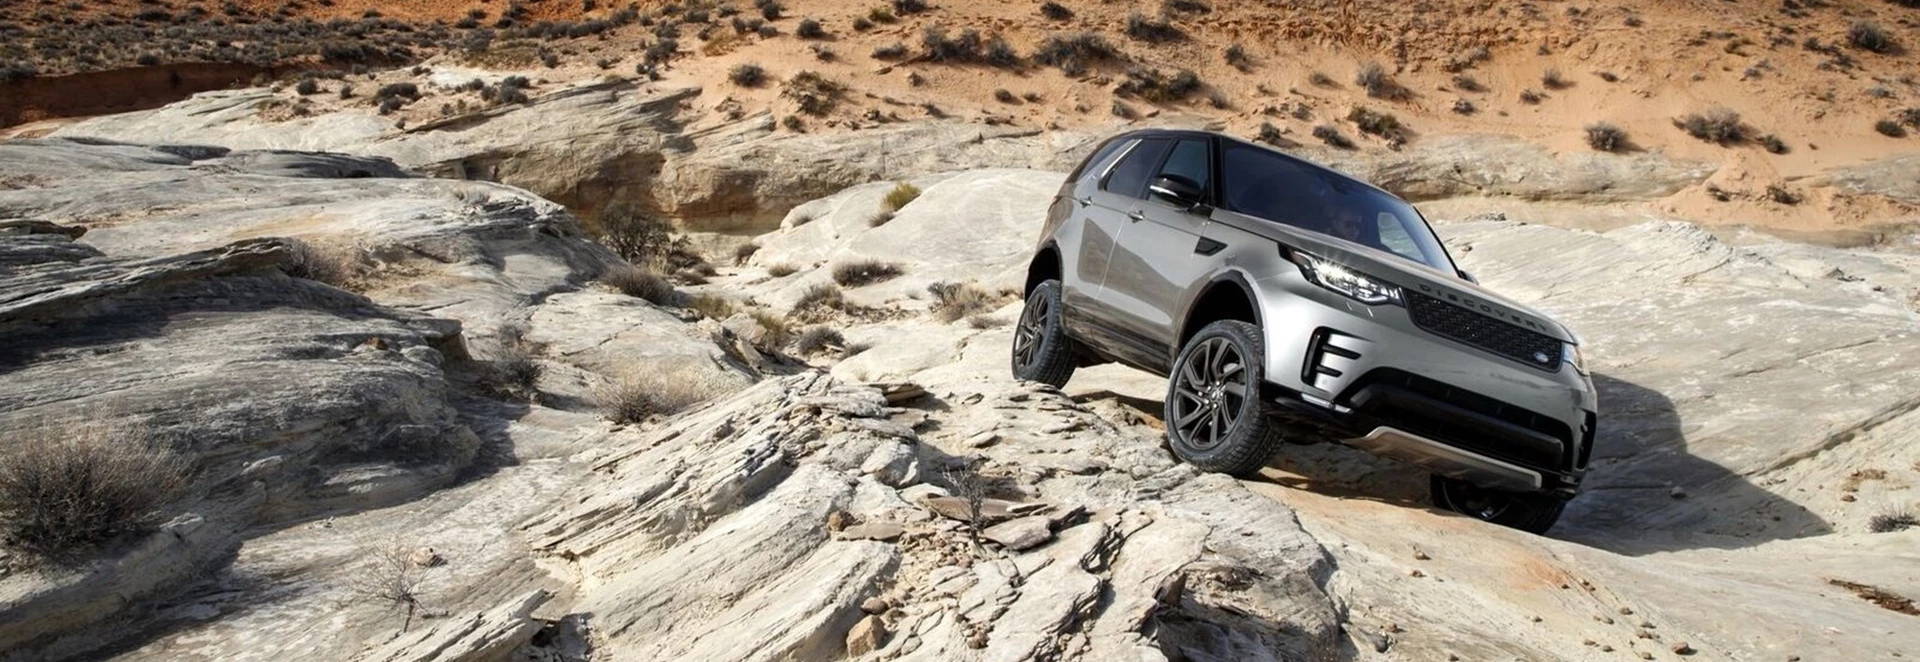 Land Rover are developing self-driving SUVs that can go off-road 